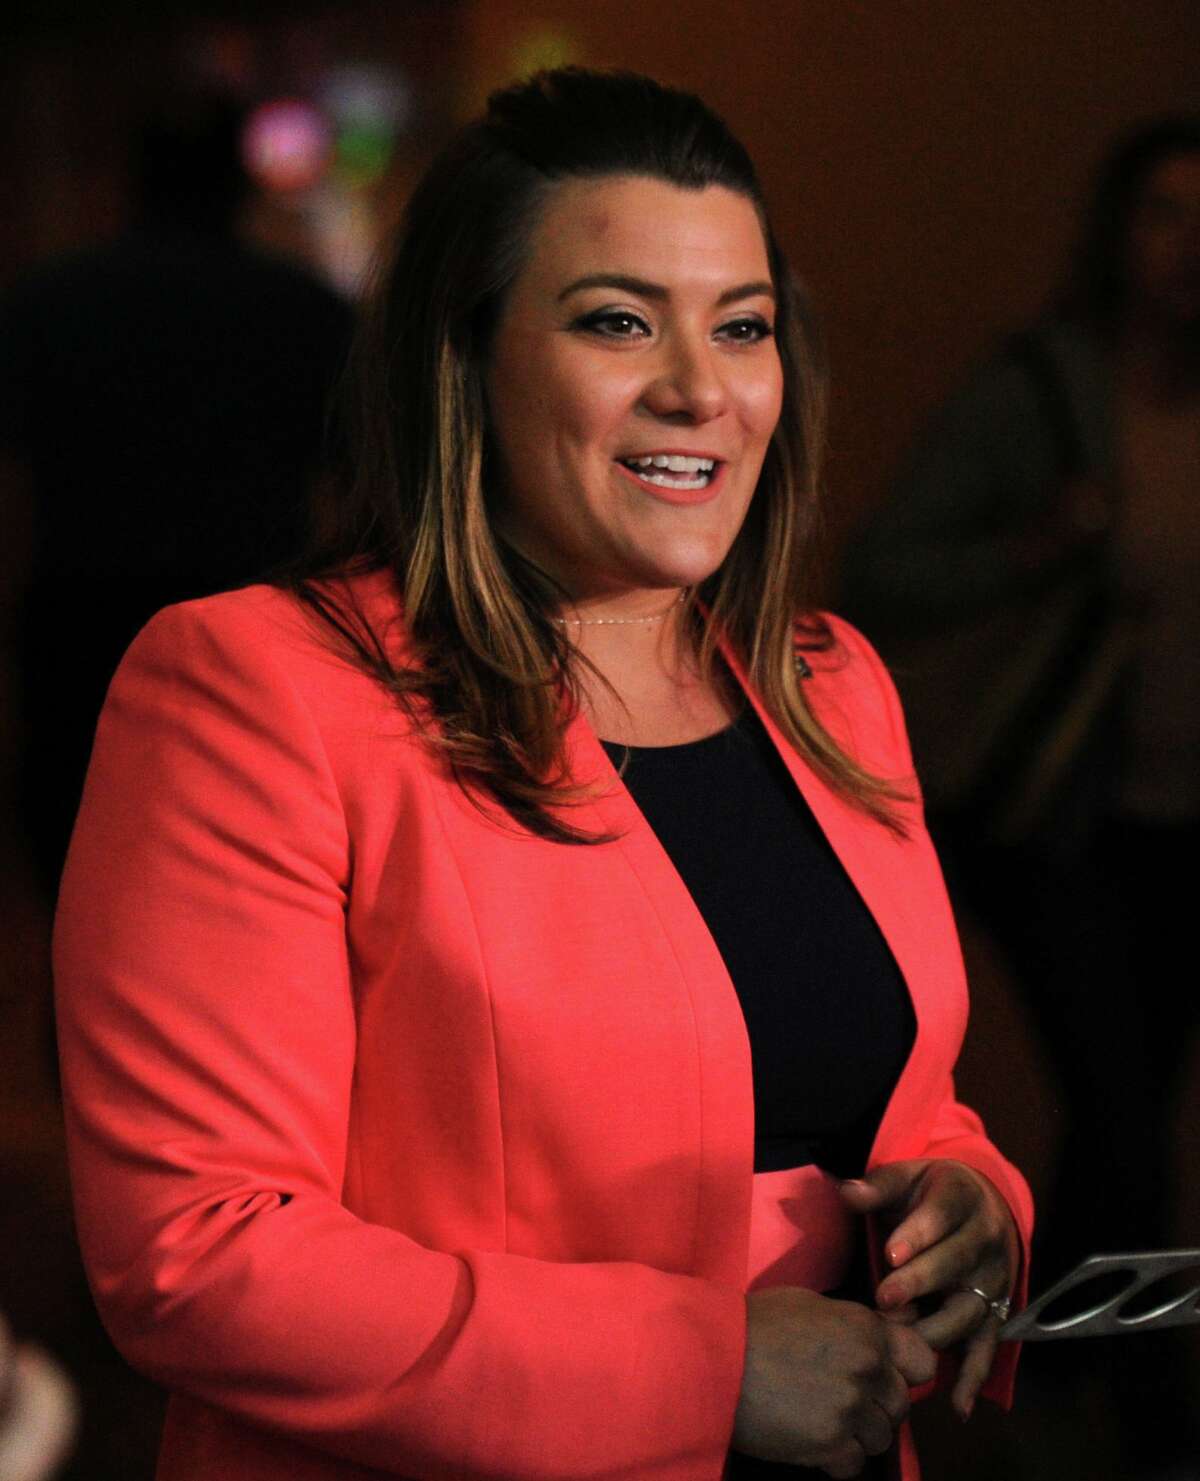 New Britain Mayor Erin Stewart at a press conference prior to the Republican State Convention at Foxwoods Casino, Mashantucket, Conn., Friday, May 11, 2018. On Sunday, Stewart announced New Britain has confirmed its first confirmed case of a patient with COVID-19.